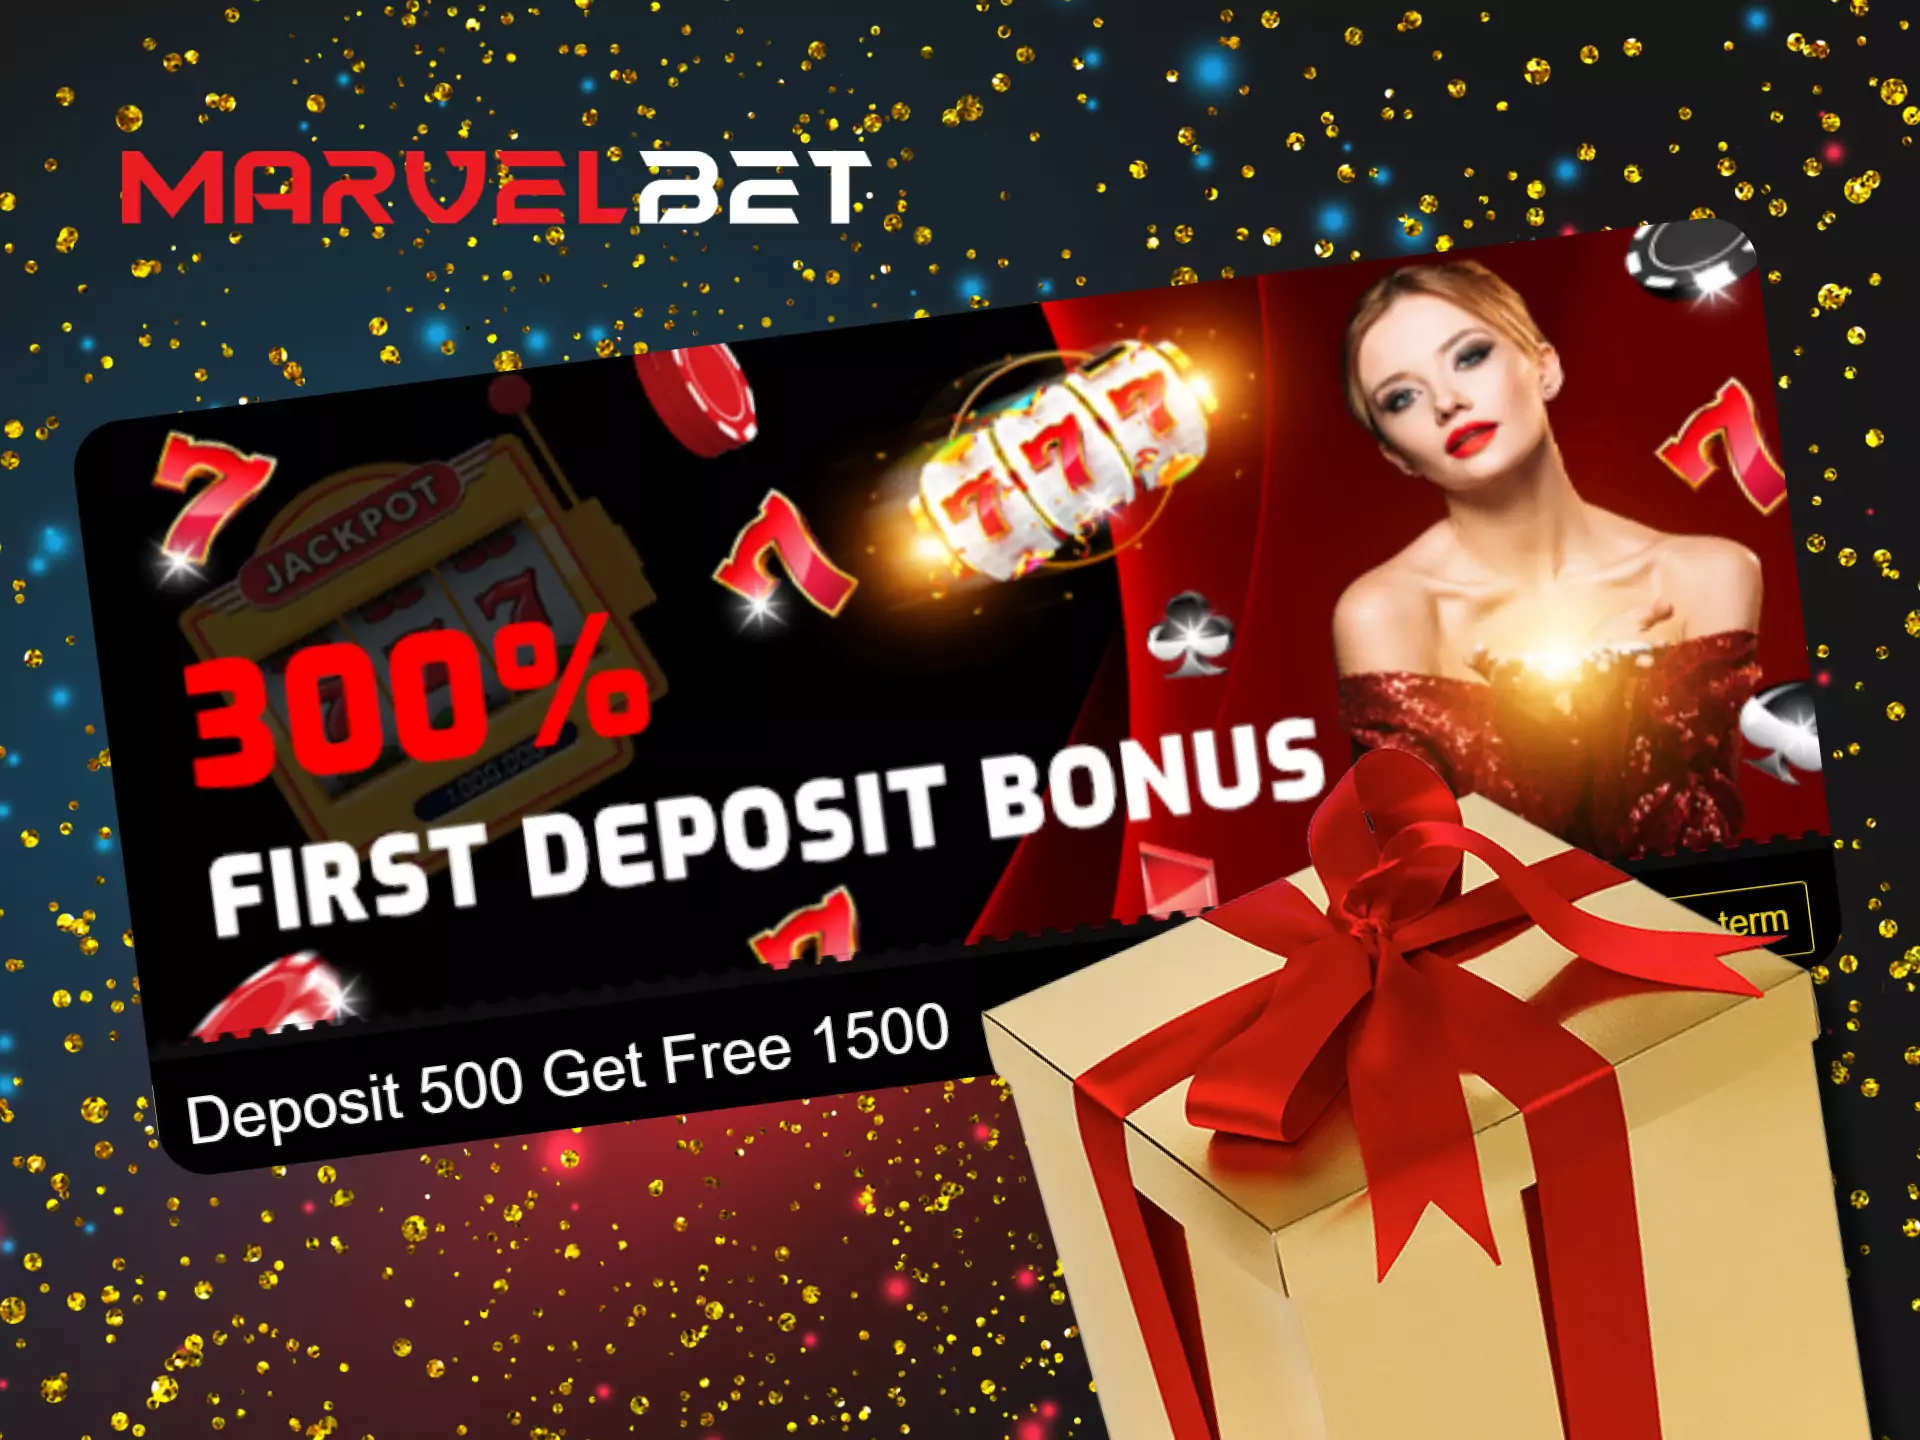 In the MarvelBet app you will get a special very profitable bonus on your first deposit.